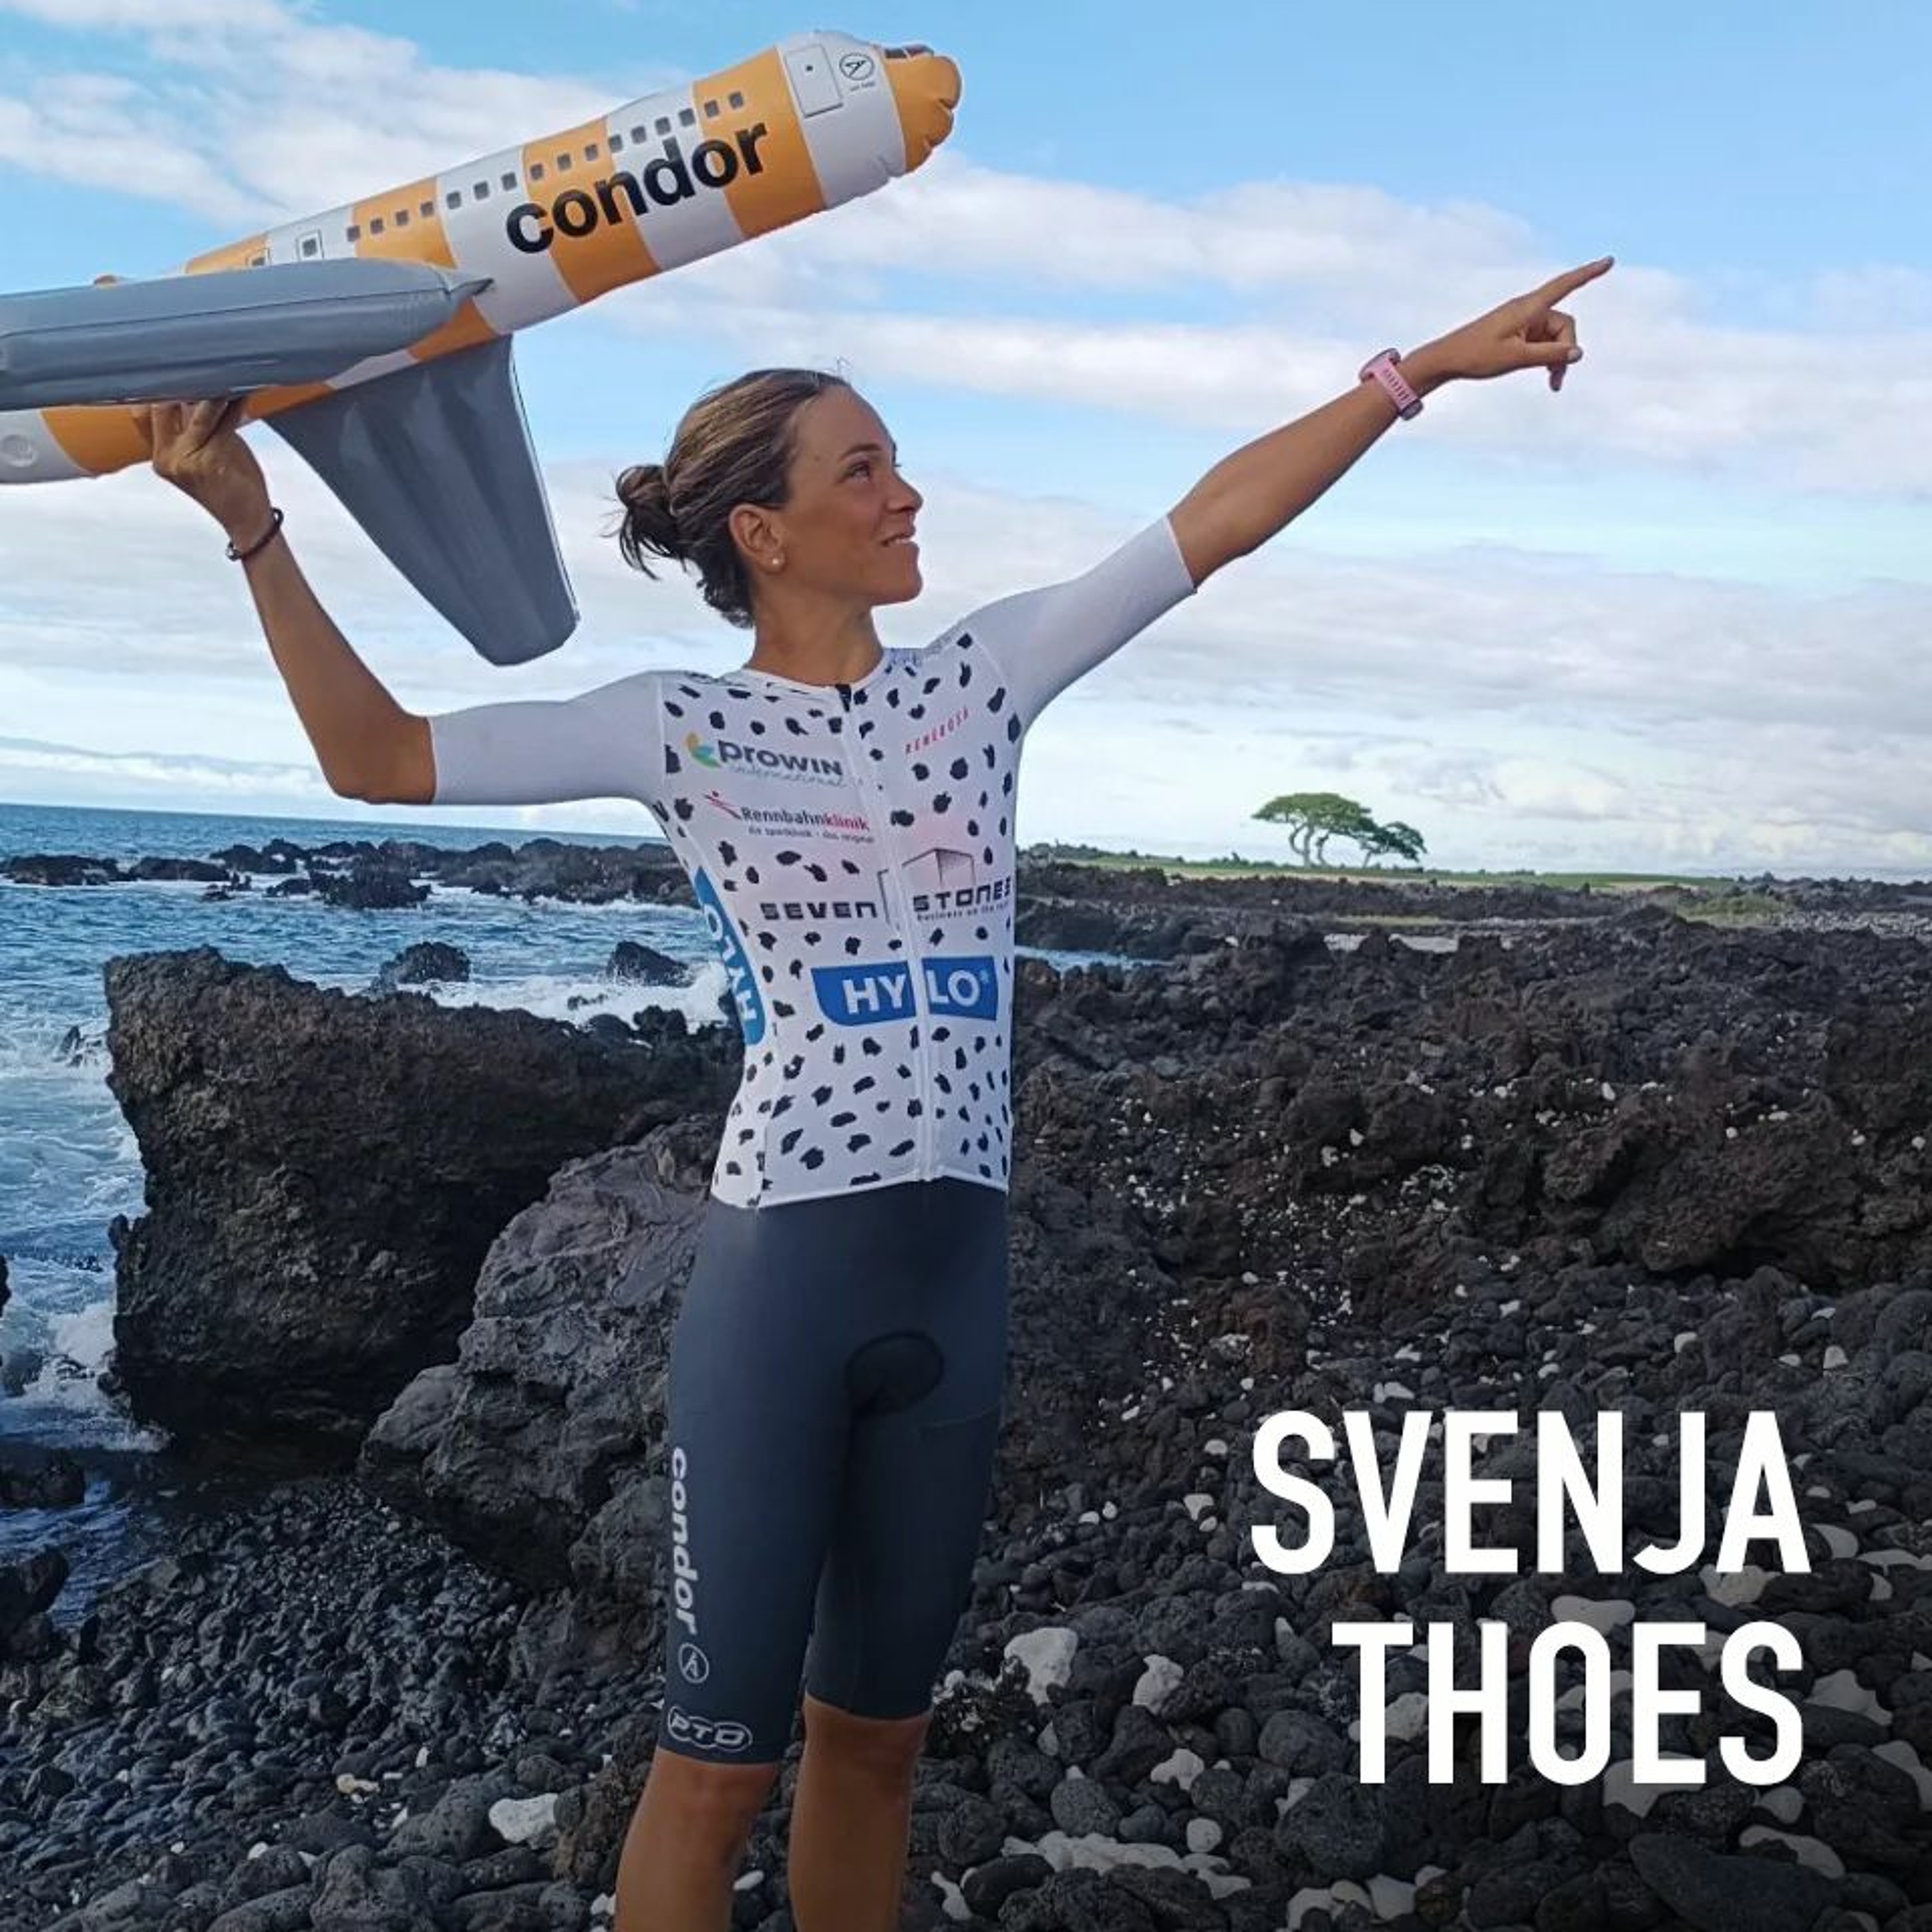 Professional Triathlete, Svenja Thoes Running On Fumes At The Ironman World Championships